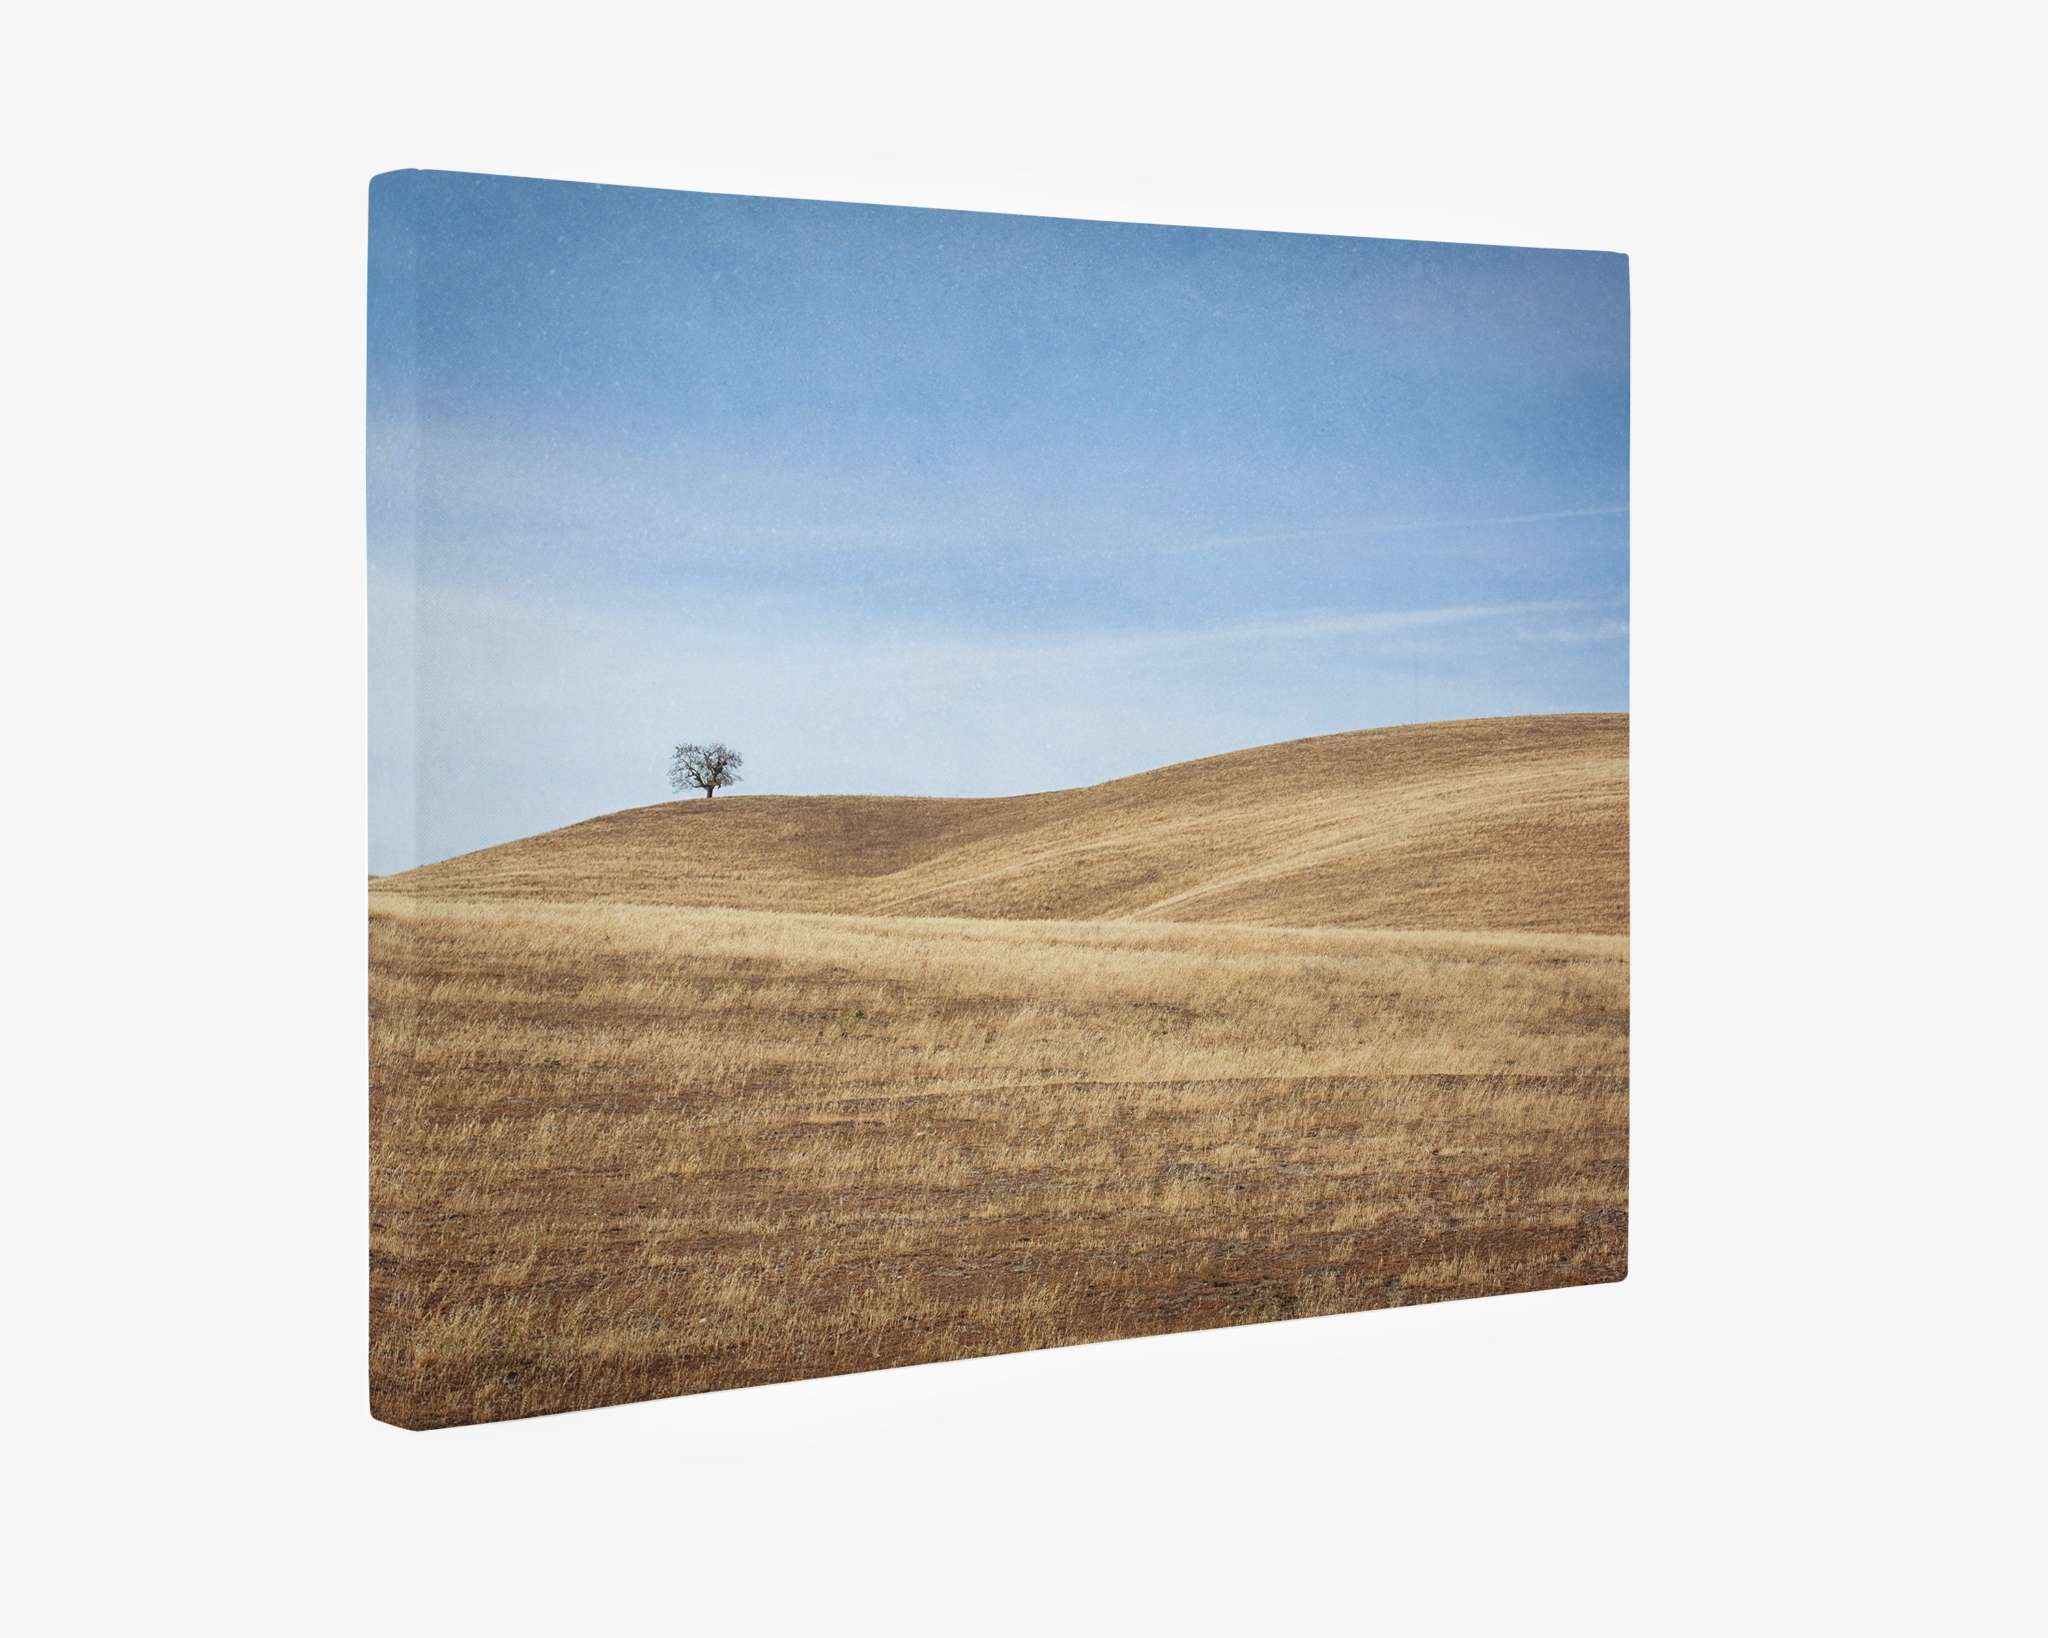 A premium artist-grade canvas print, the Offley Green California Central Coast Landscape Canvas Wall Decor &#39;Golden Ynez,&#39; features a landscape with a solitary tree on a distant hill. The scene, composed of rolling brown hills under a clear blue sky, evokes solitude and tranquility. This ready-to-hang solution offers both beauty and convenience for any space.